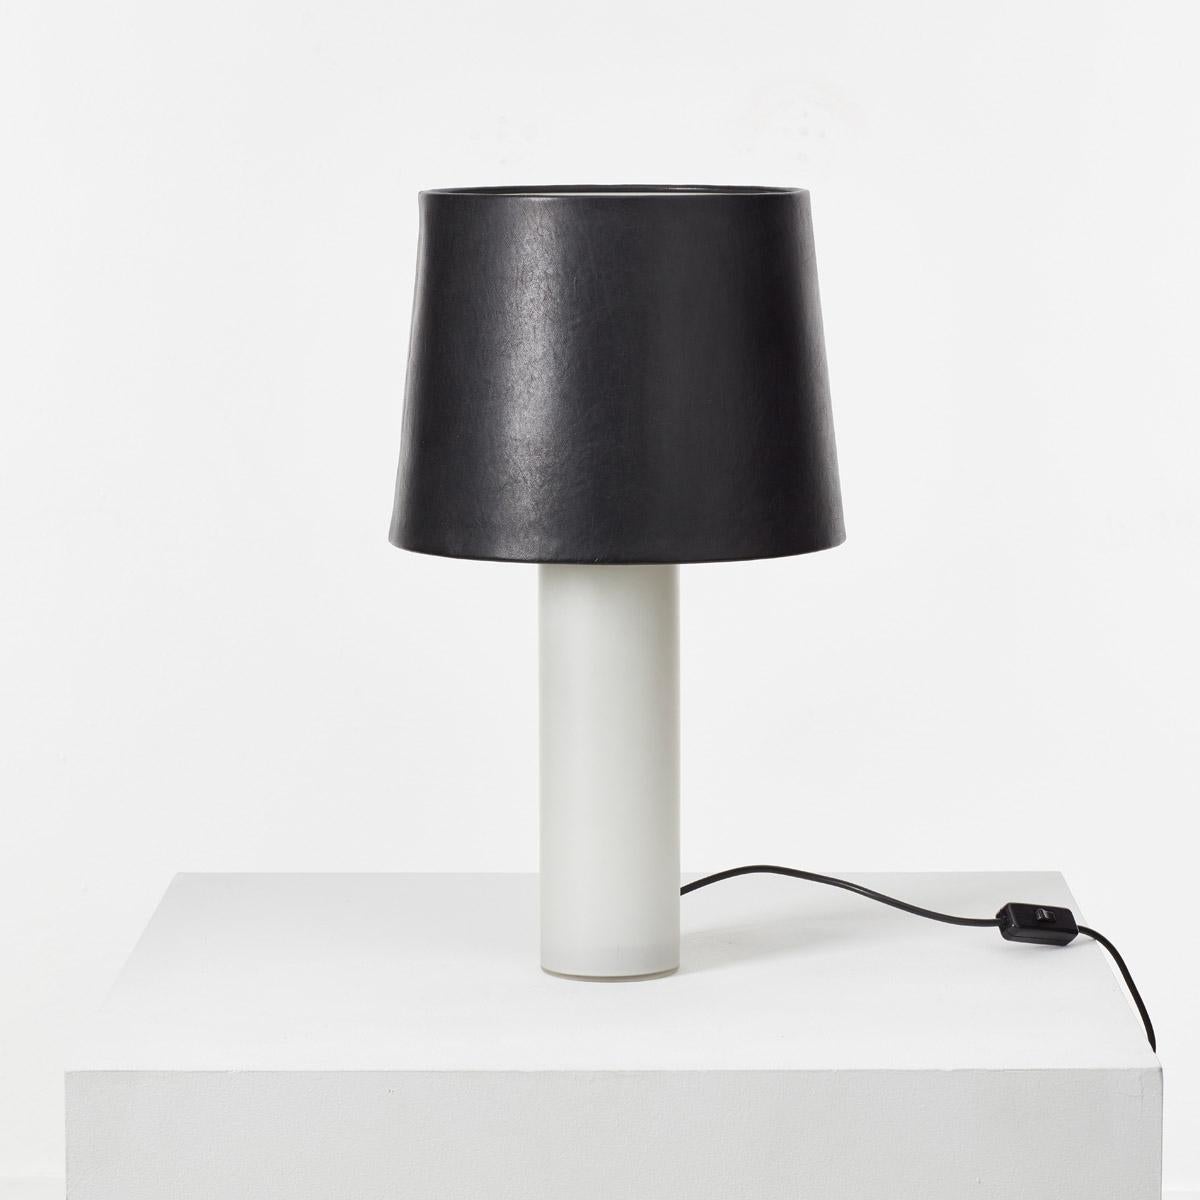 This elegantly refined milk glass table lamp was designed by brothers Uno and Osten Kristiansson for Swedish manufacturer Luxus. Designed circa 1960 this piece demonstrates the designers’ clear Swedish modern aesthetic.

The lamp base is made from